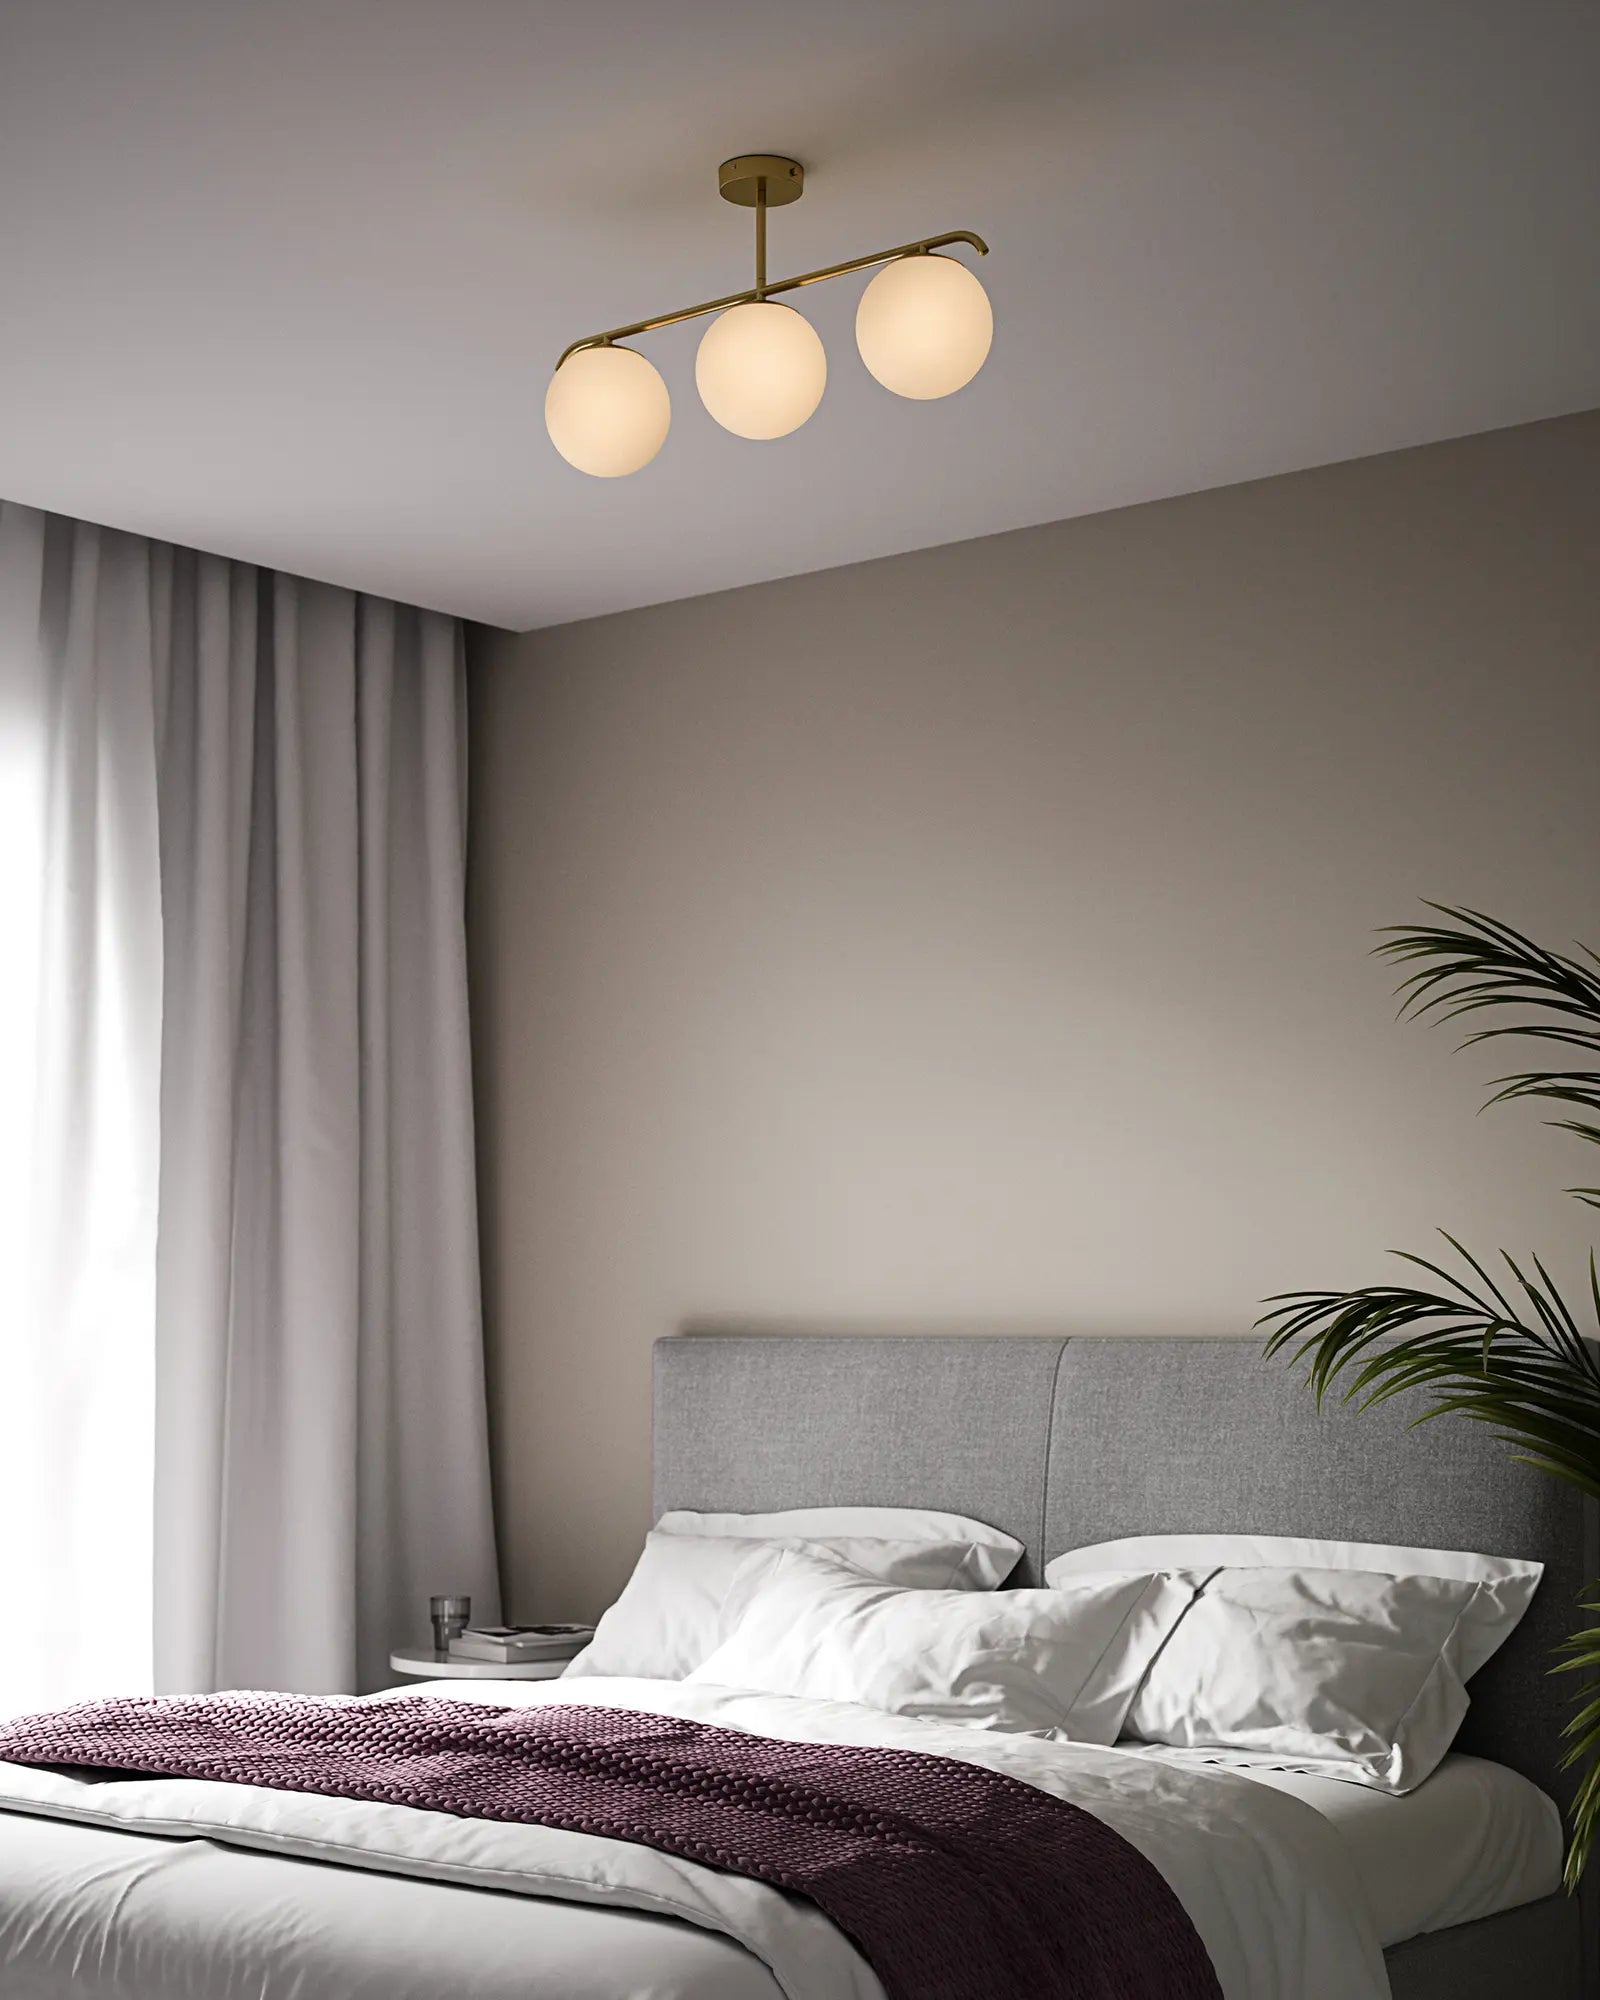 Grant orb pendant light in opal and brass 3 lights above a bed